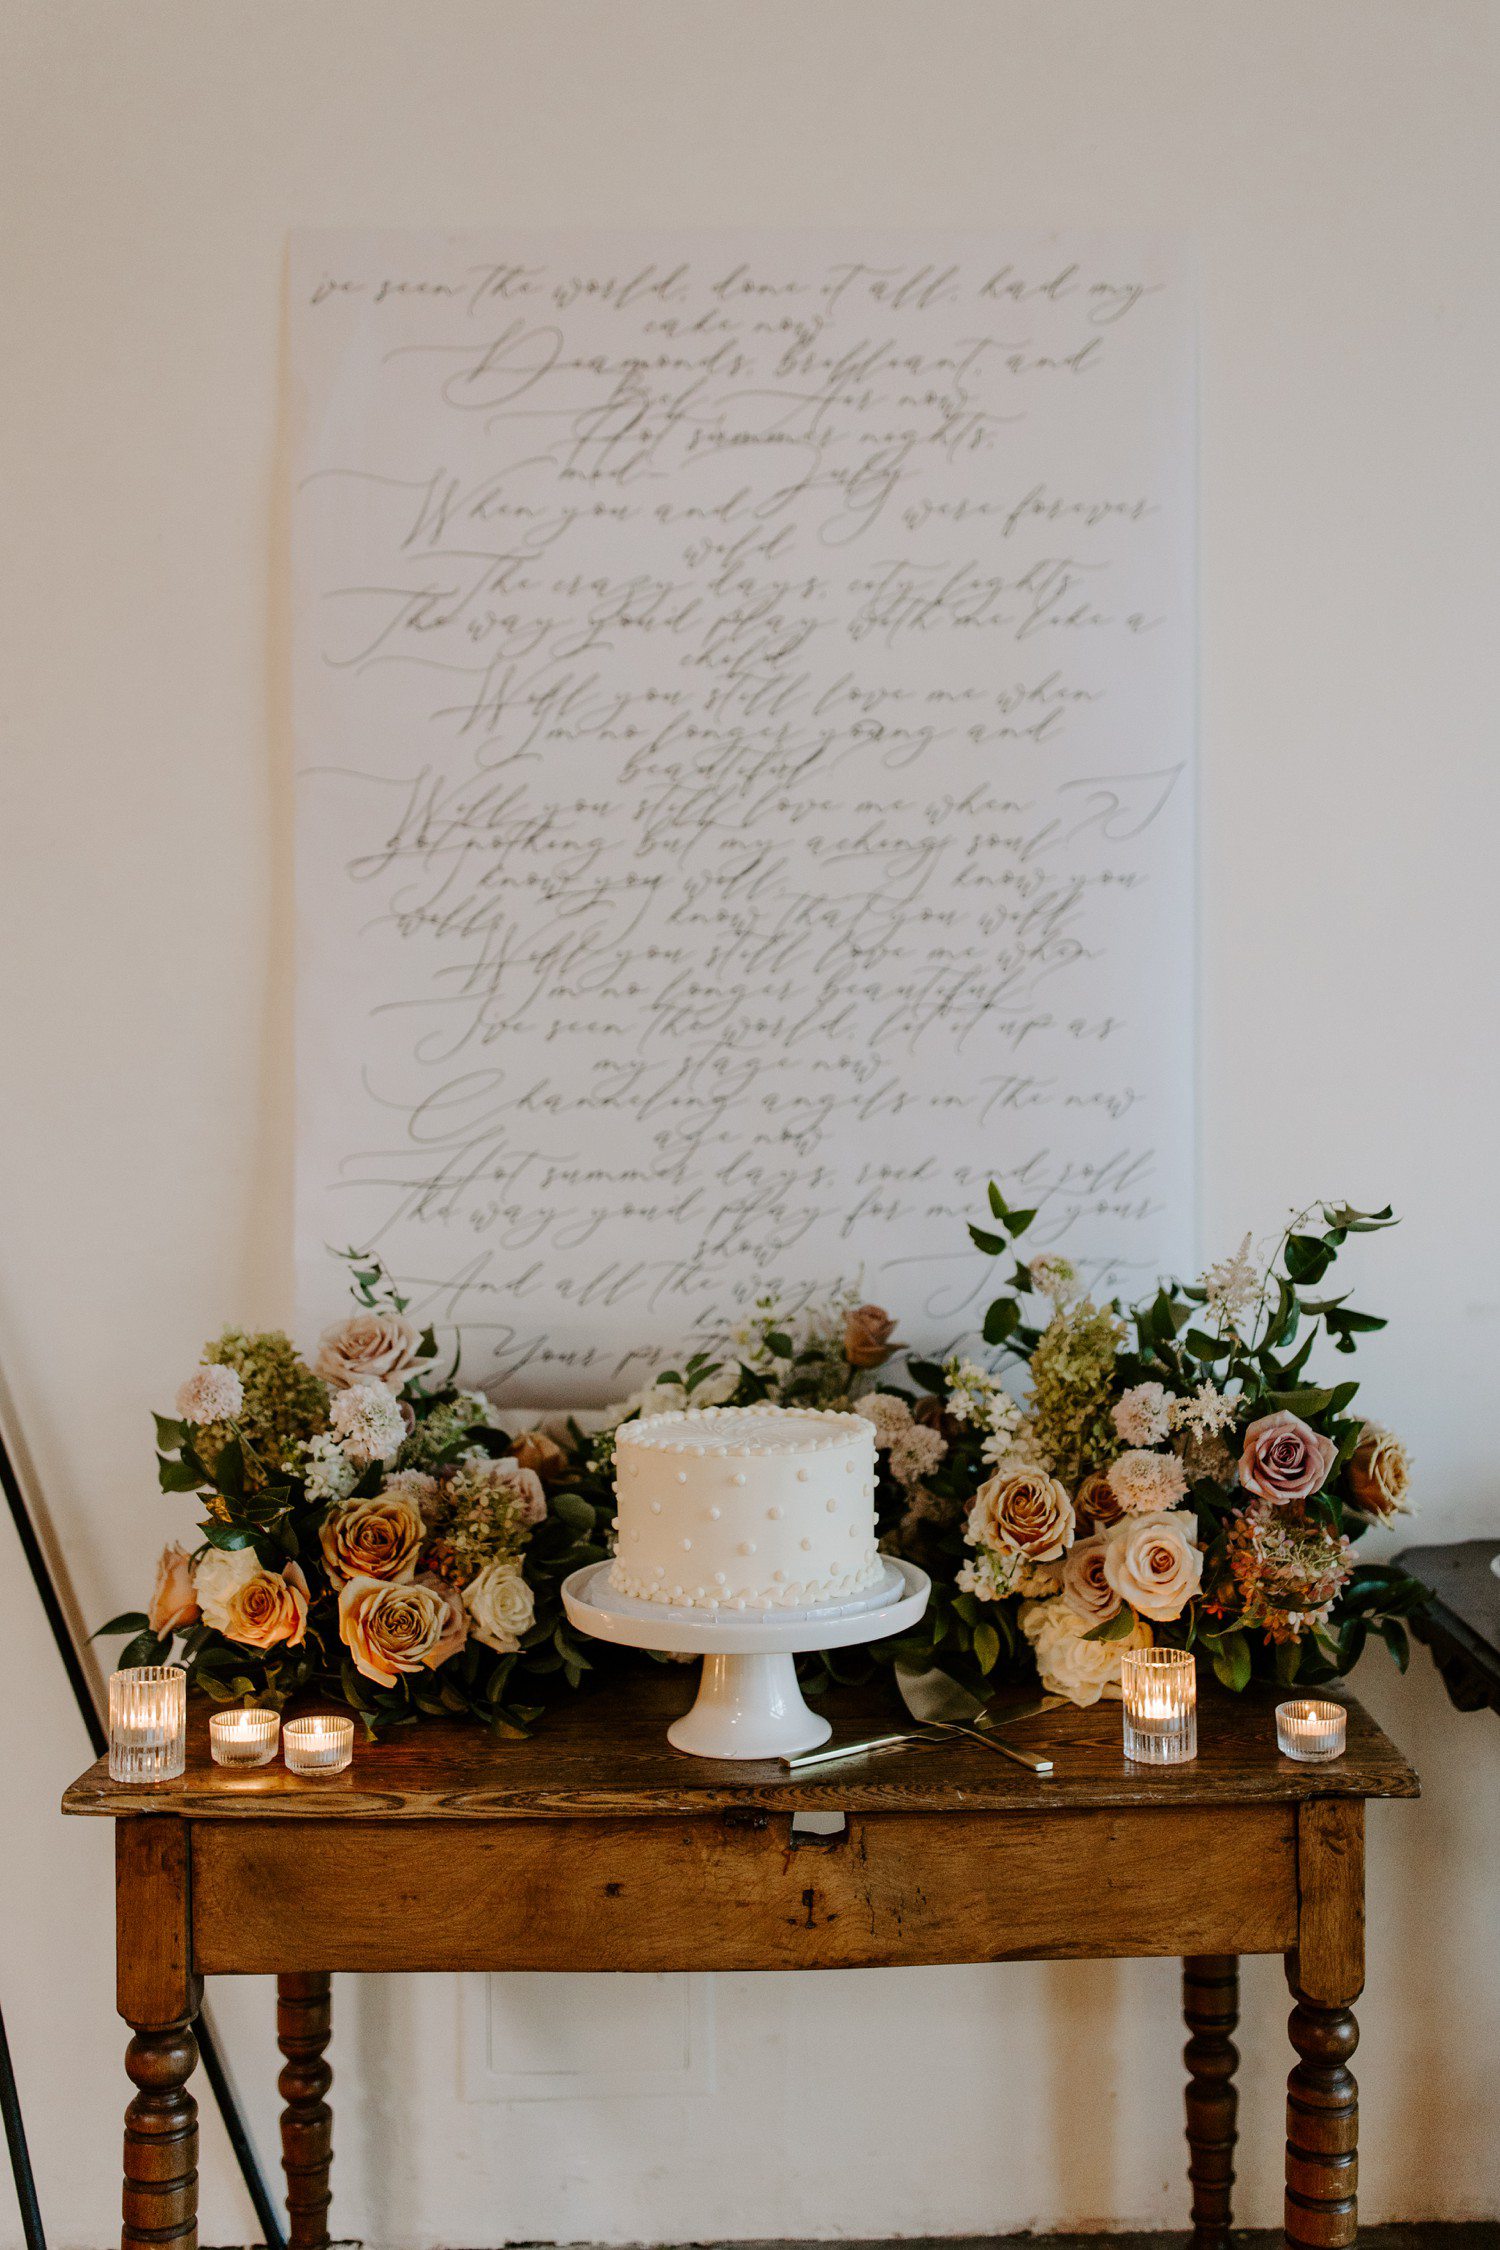 Small wedding cake table with florals and script sign.